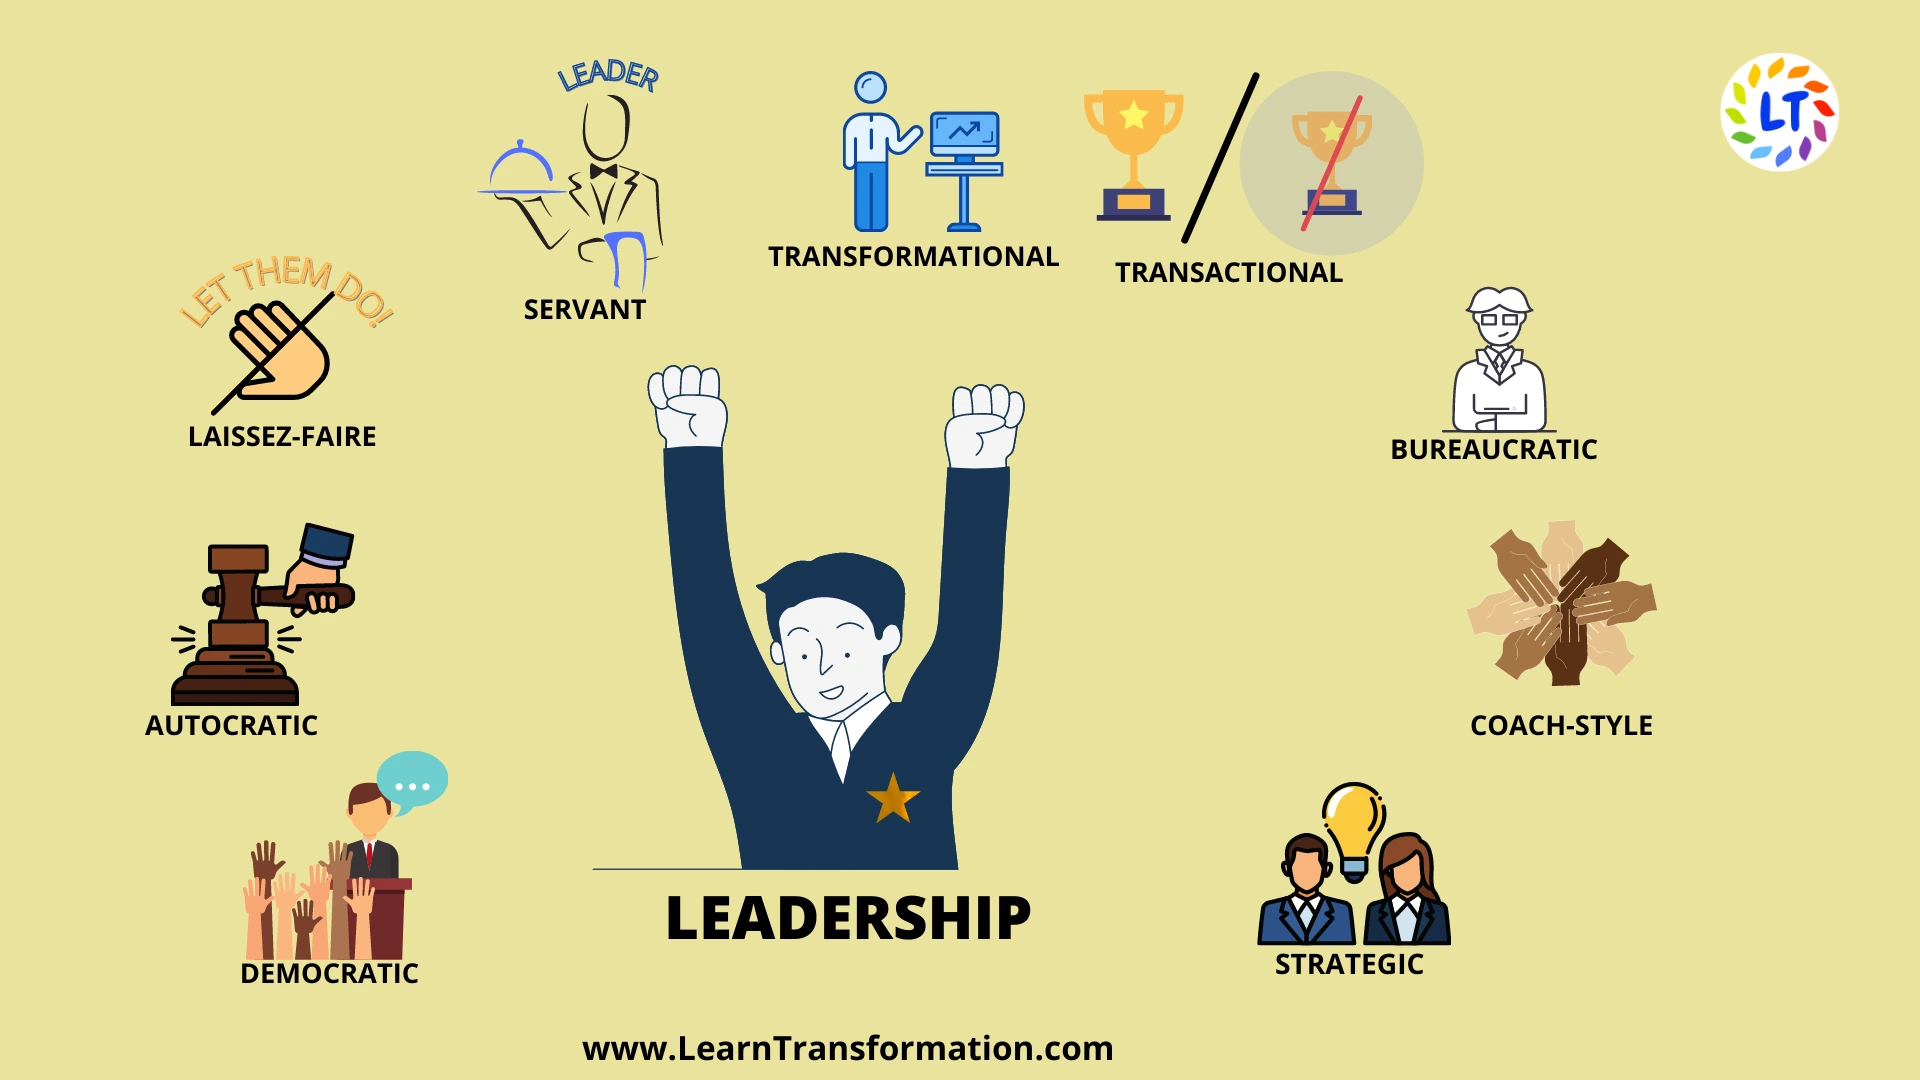 Leadership Style Quiz: What Kind of Leader Are You?